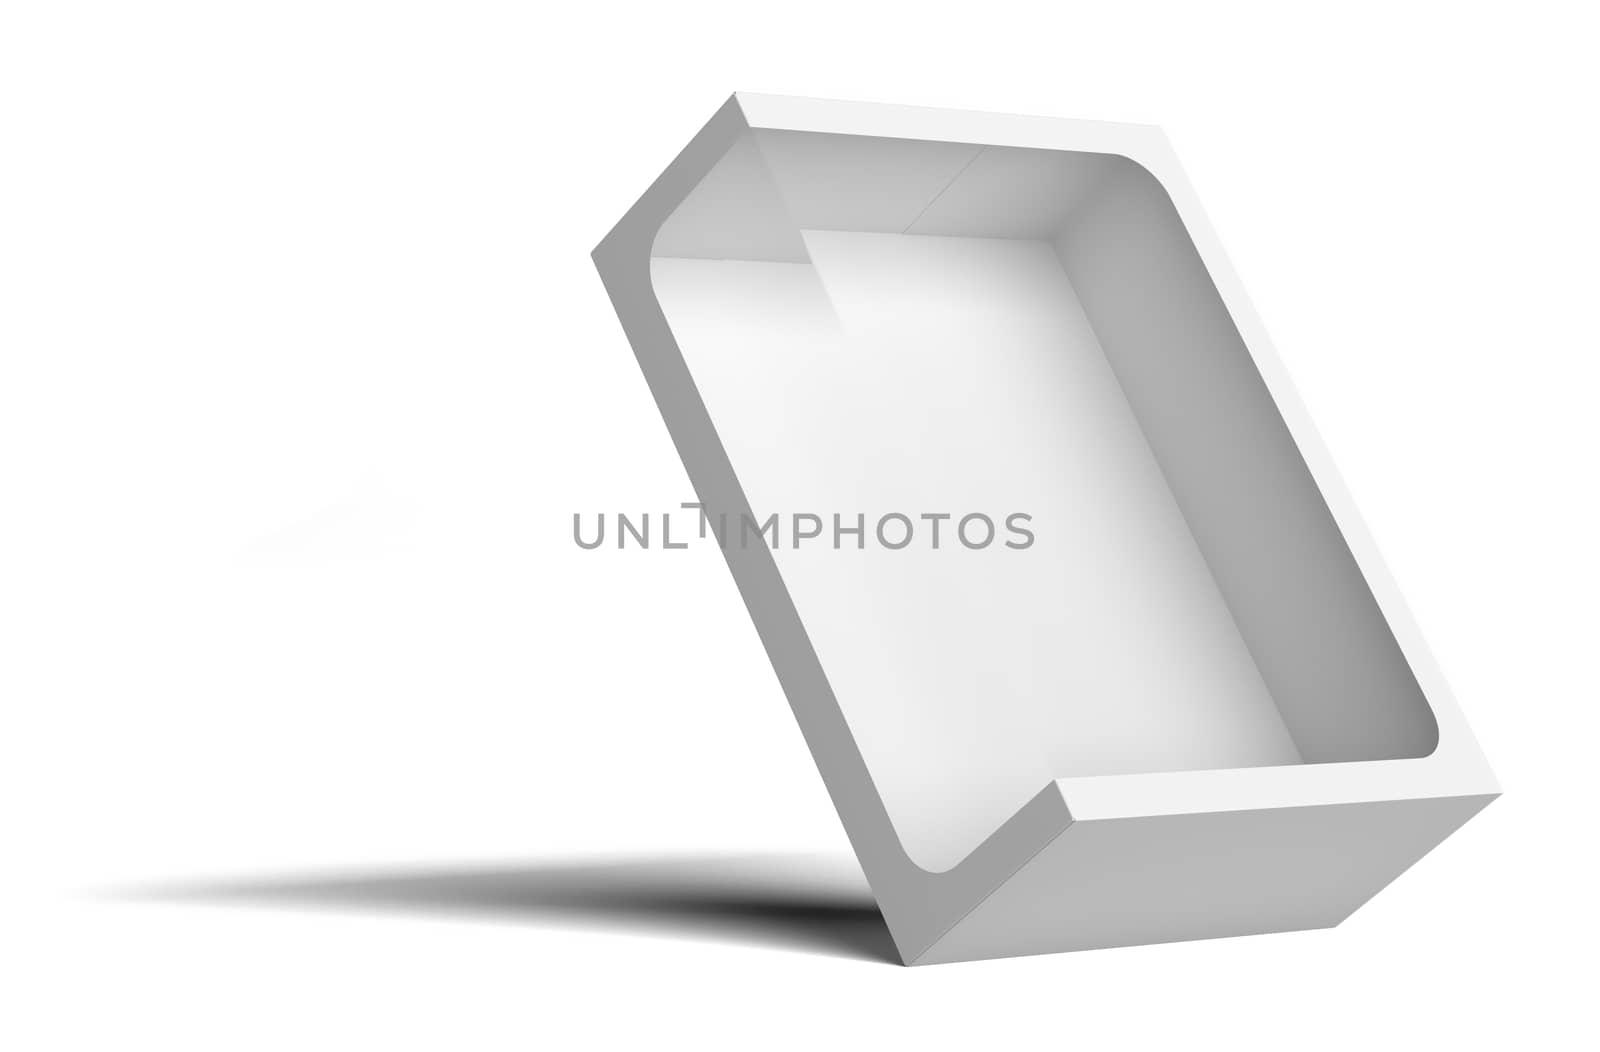 White empty packing cardboard box. In the box cutout in the middle. Box tilted back. Isolated on white background. 3D illustration